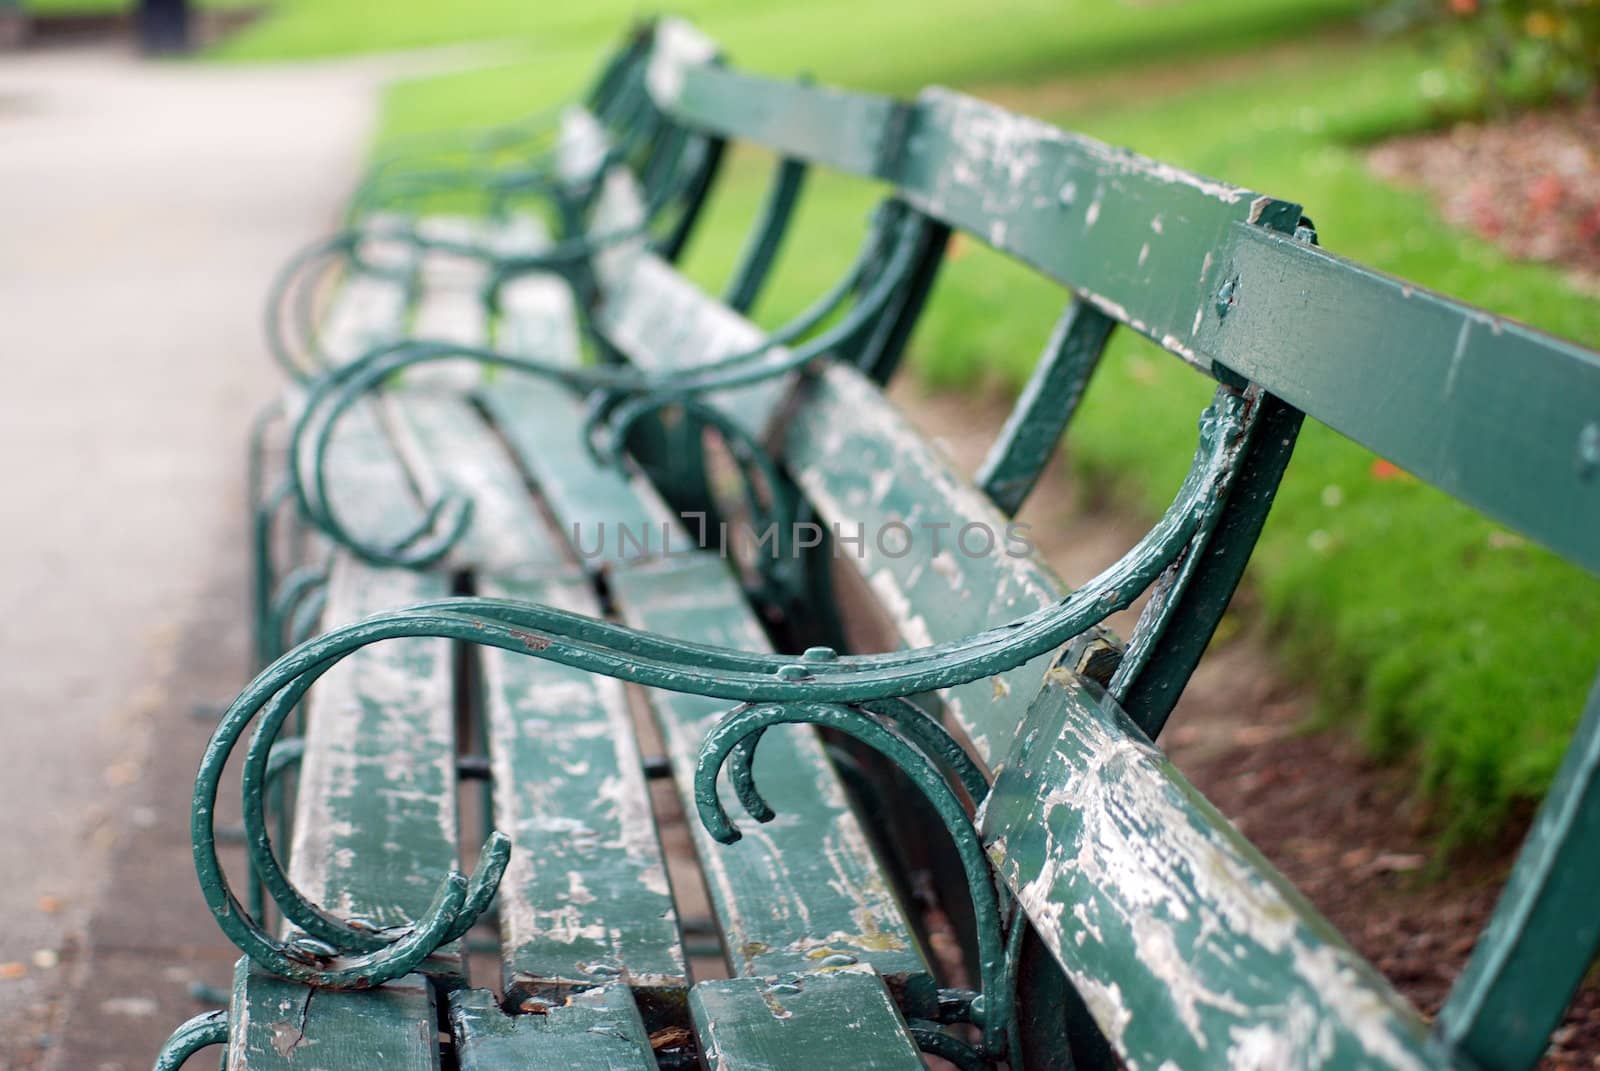 Park Benches by pwillitts